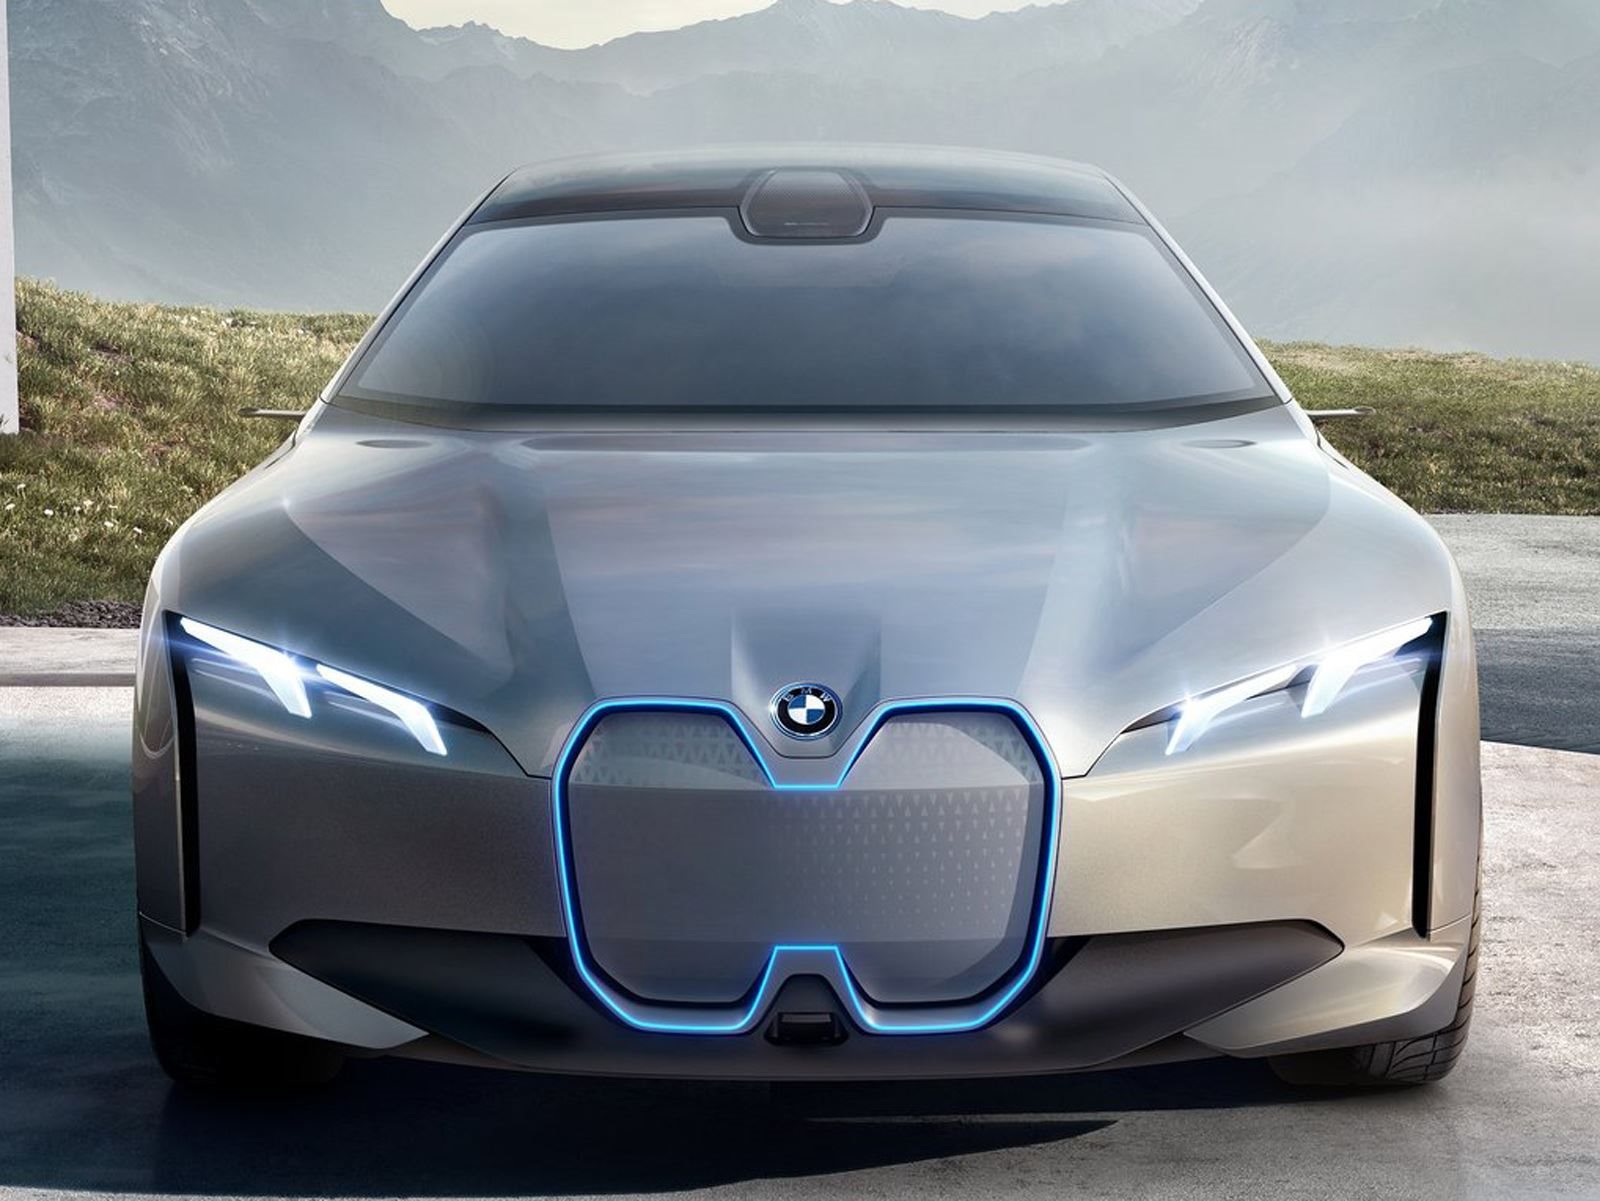 BMW knows the internal combustion engine will be history